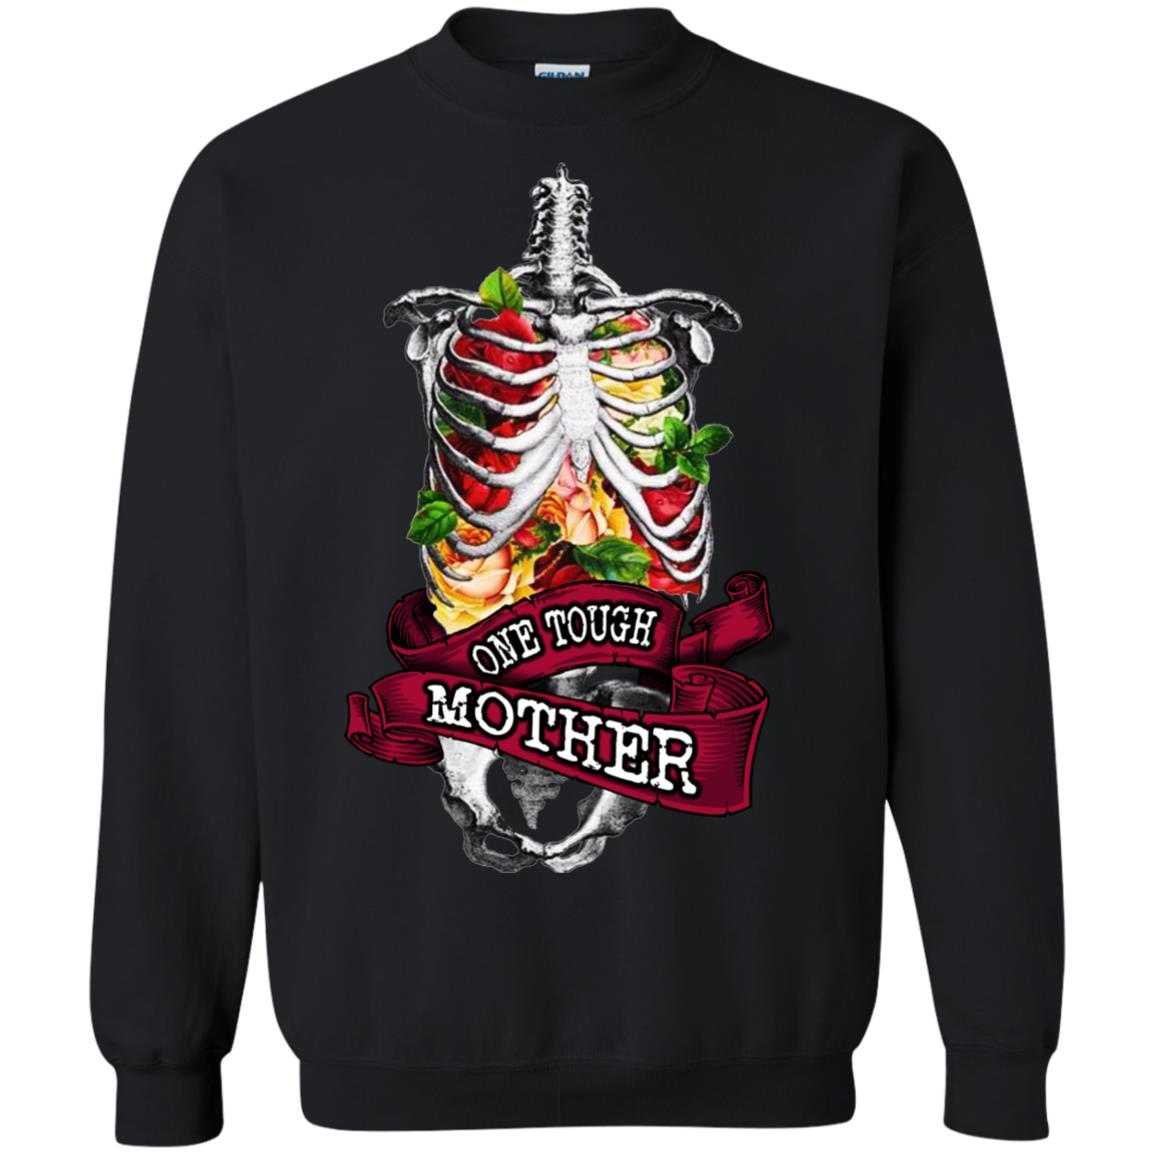 One Tough Mother Mommy Shirt